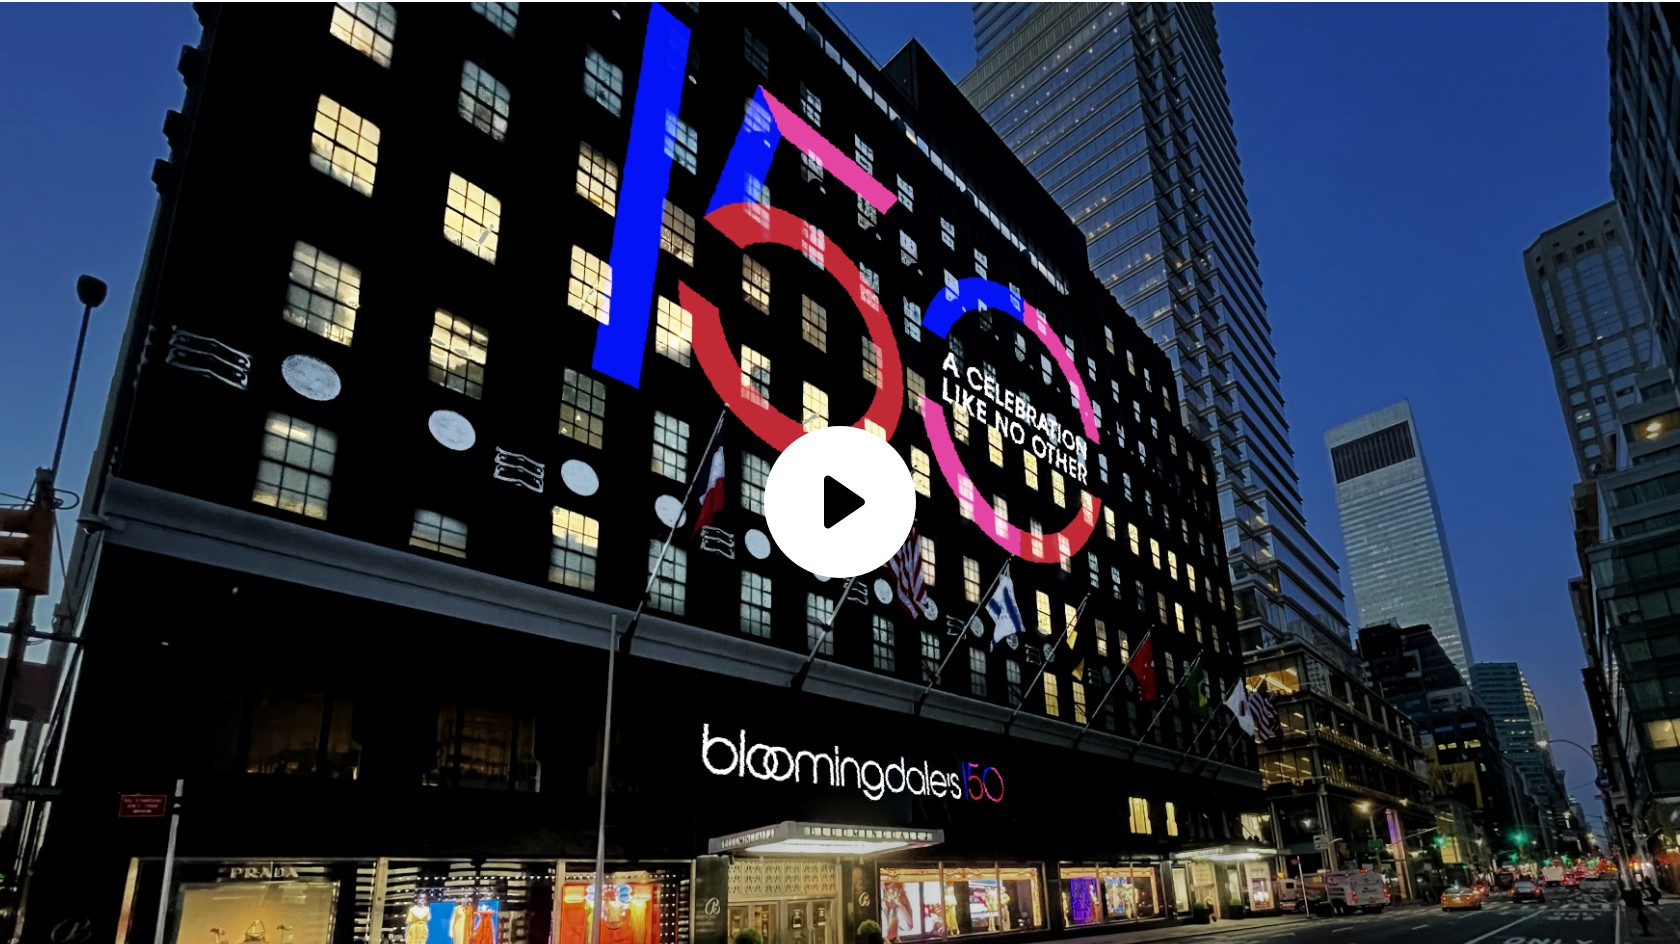 Bloomingdale's: Everything You Need to Know About Its 150th